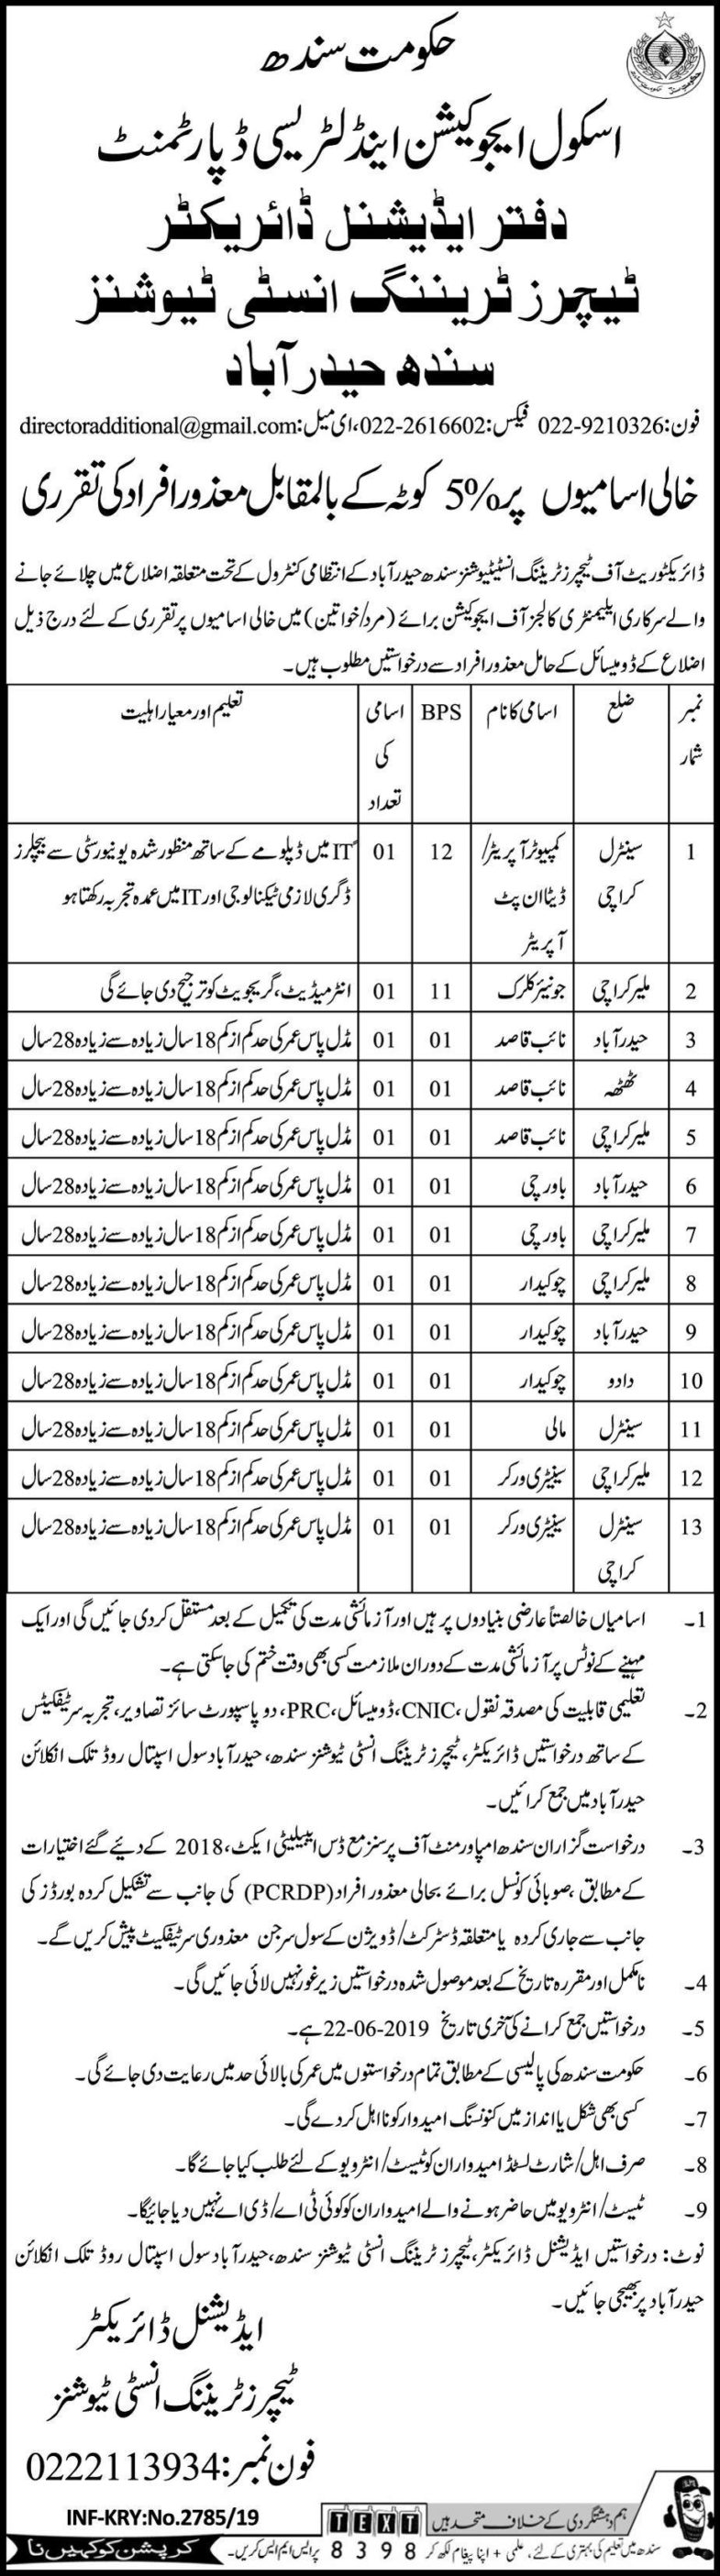 School Education & literacy Department Jobs 2019 For 13+ Posts